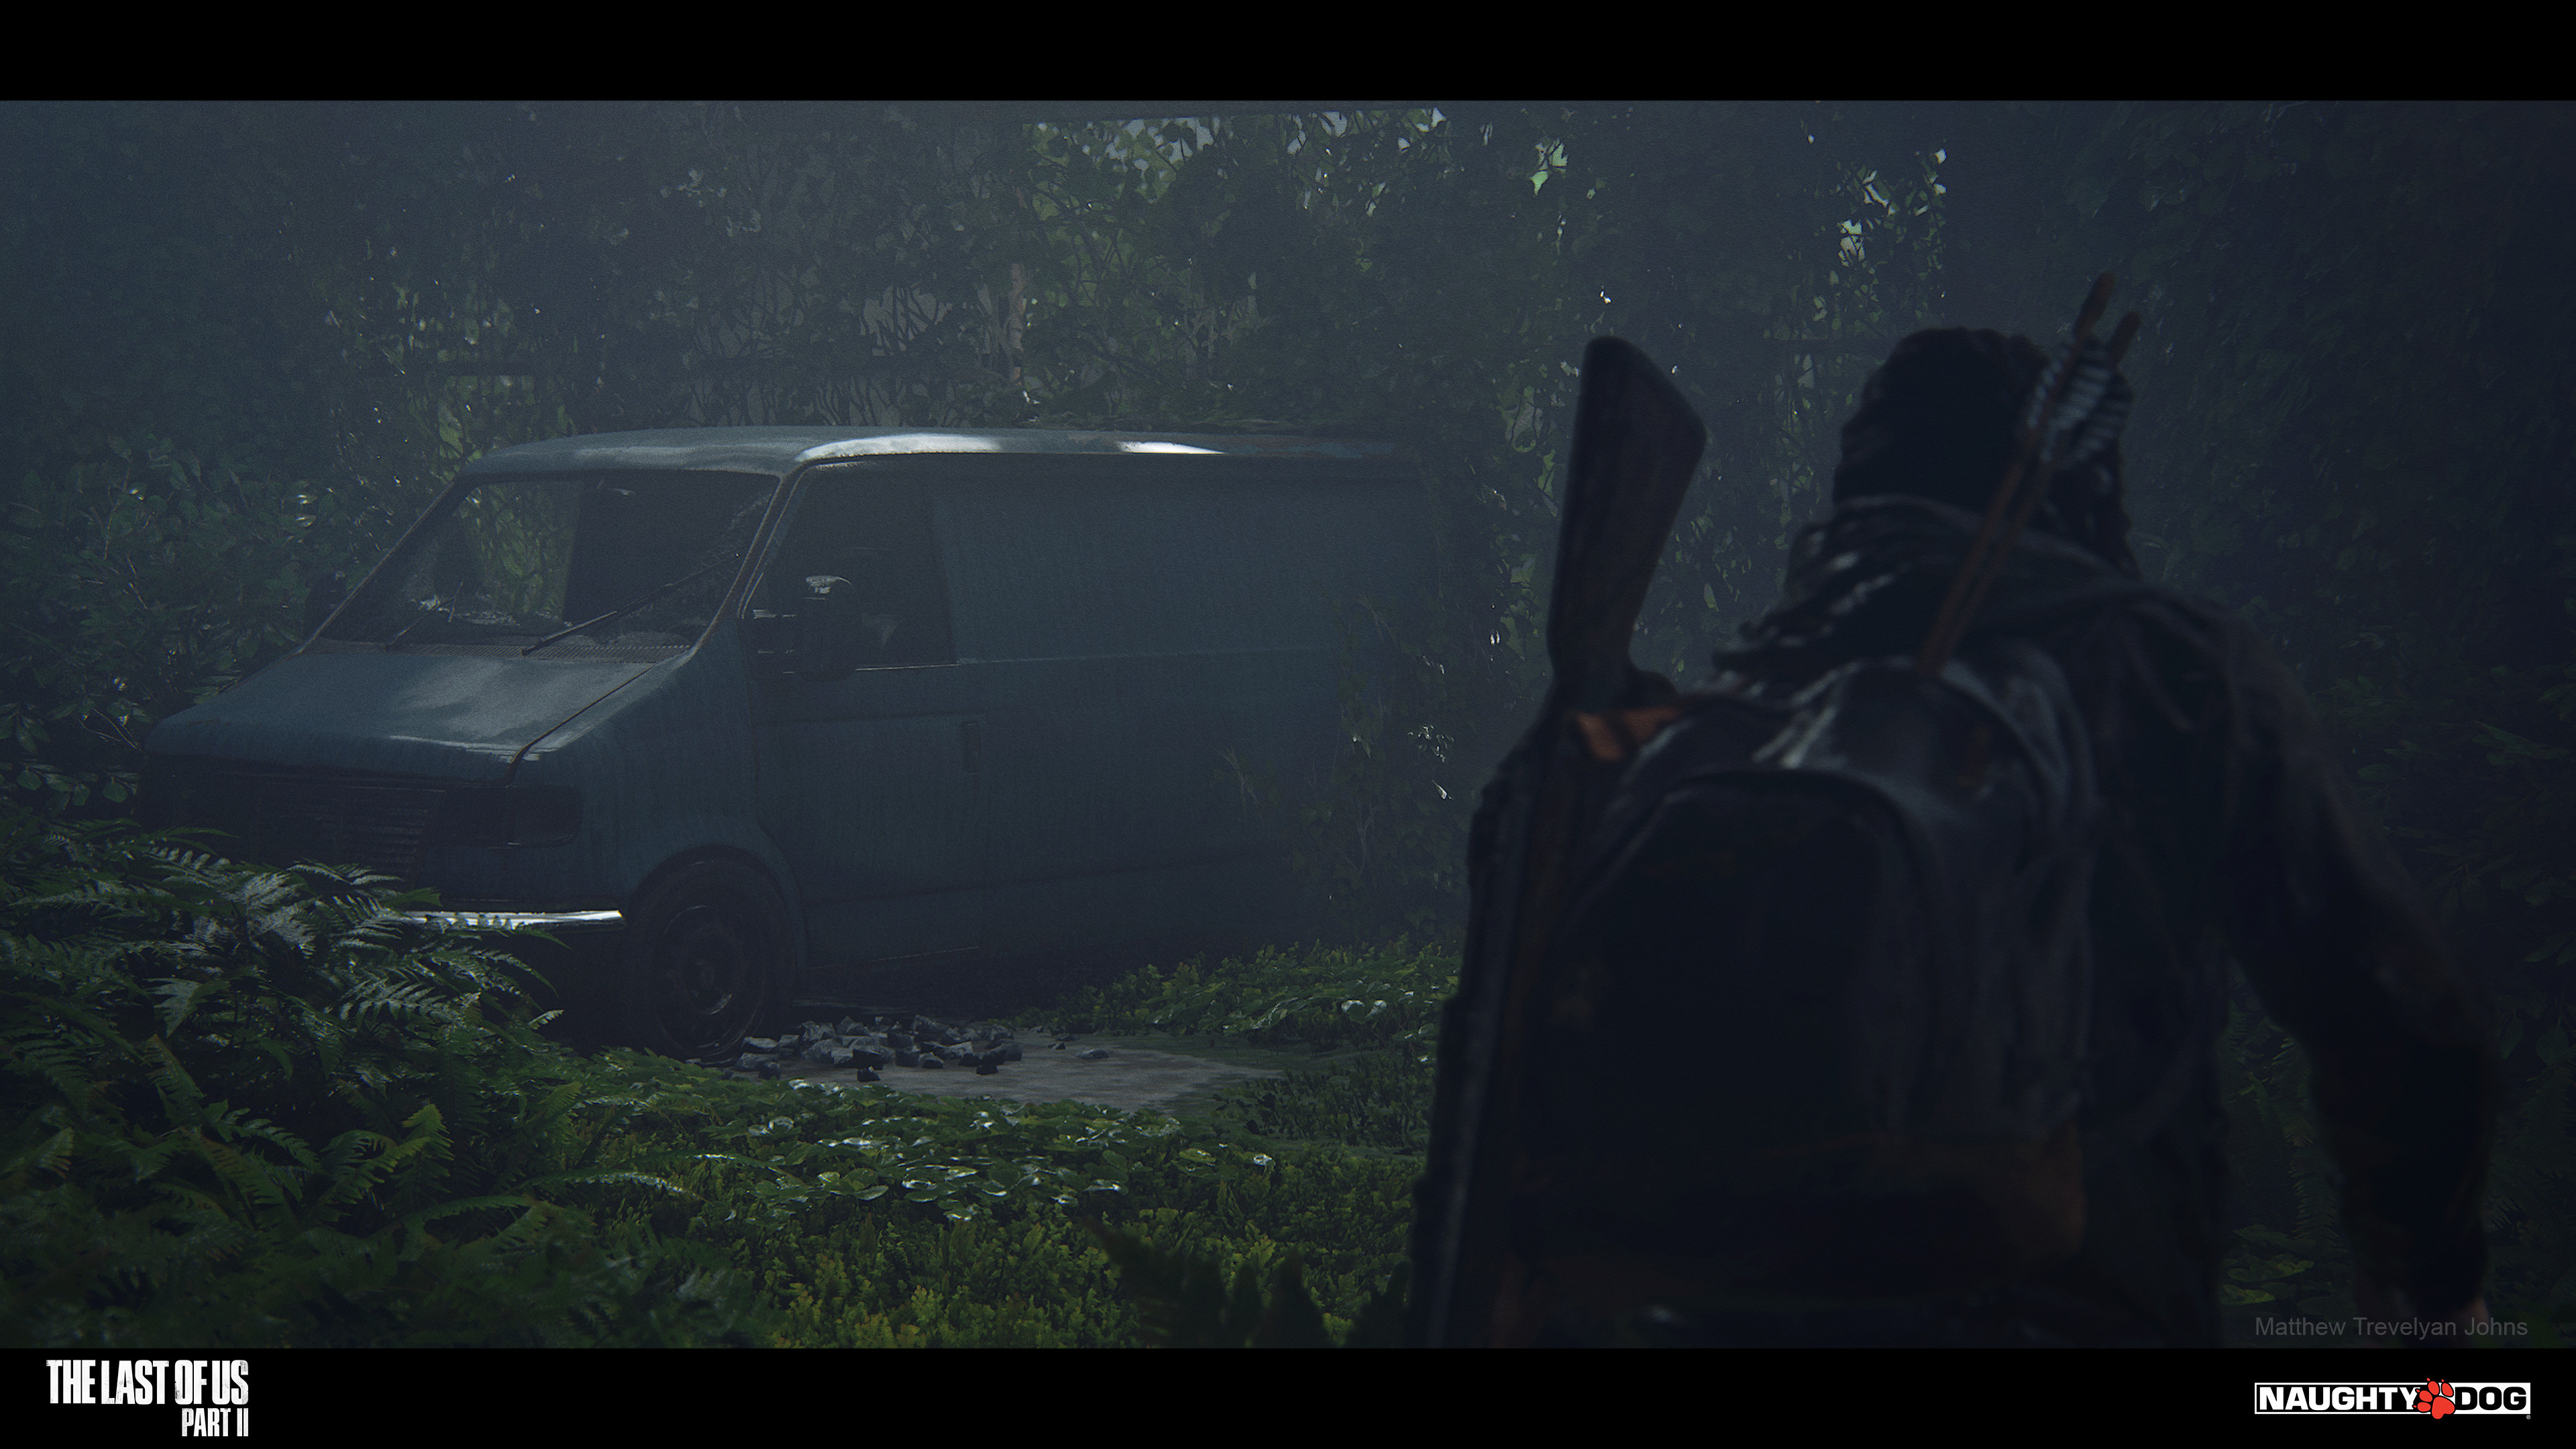 This gallery features technical information in some posts as well as just a selection of nice examples of my wet vehicles from the game. I really liked this little van, tucked away in Seattle under a canopy of mist and ivy